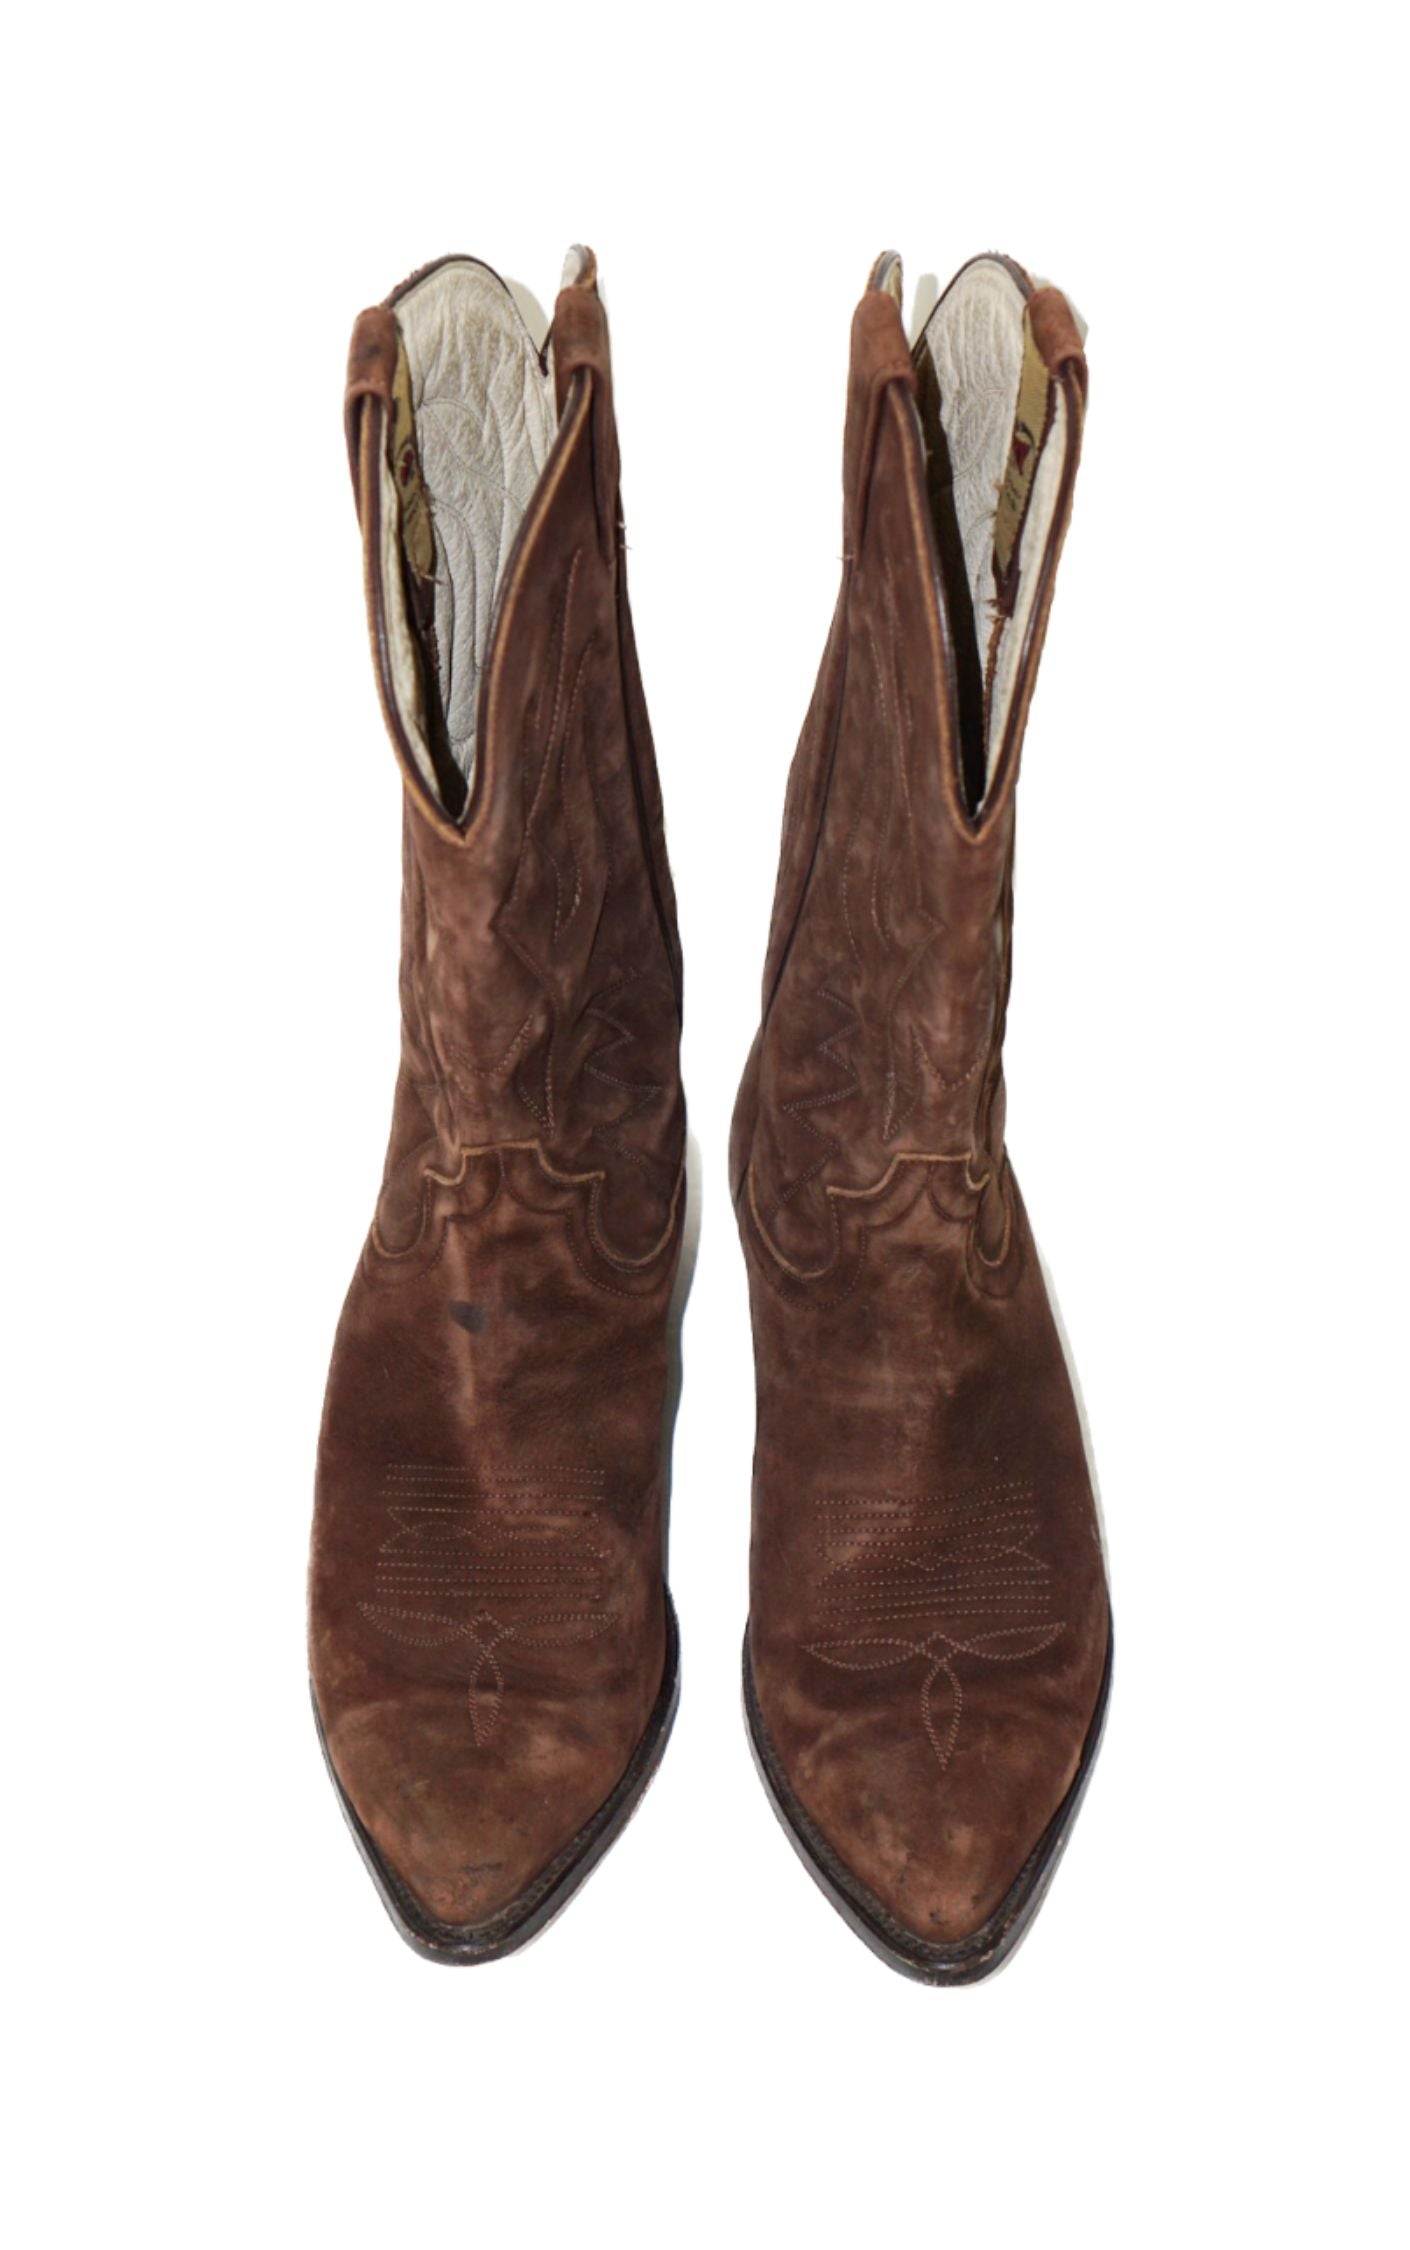 CRAZY BULL Brown Western Cowboy Boots resellum